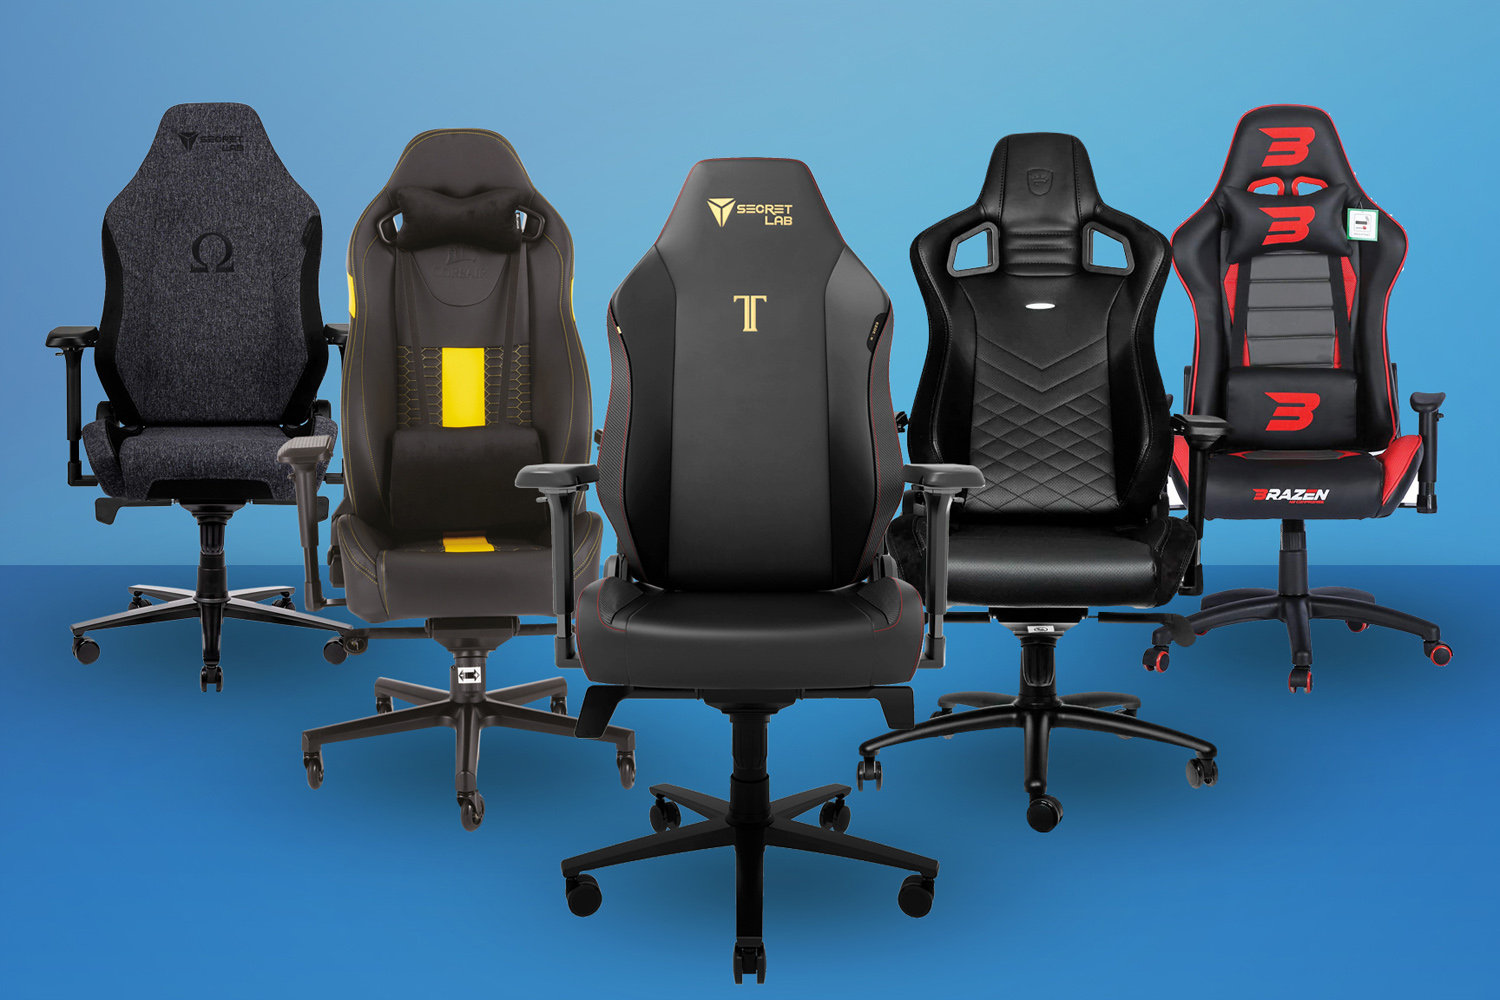 https://www.stuff.tv/wp-content/uploads/sites/2/2023/01/Best-gaming-chairs-2023-lead.jpg